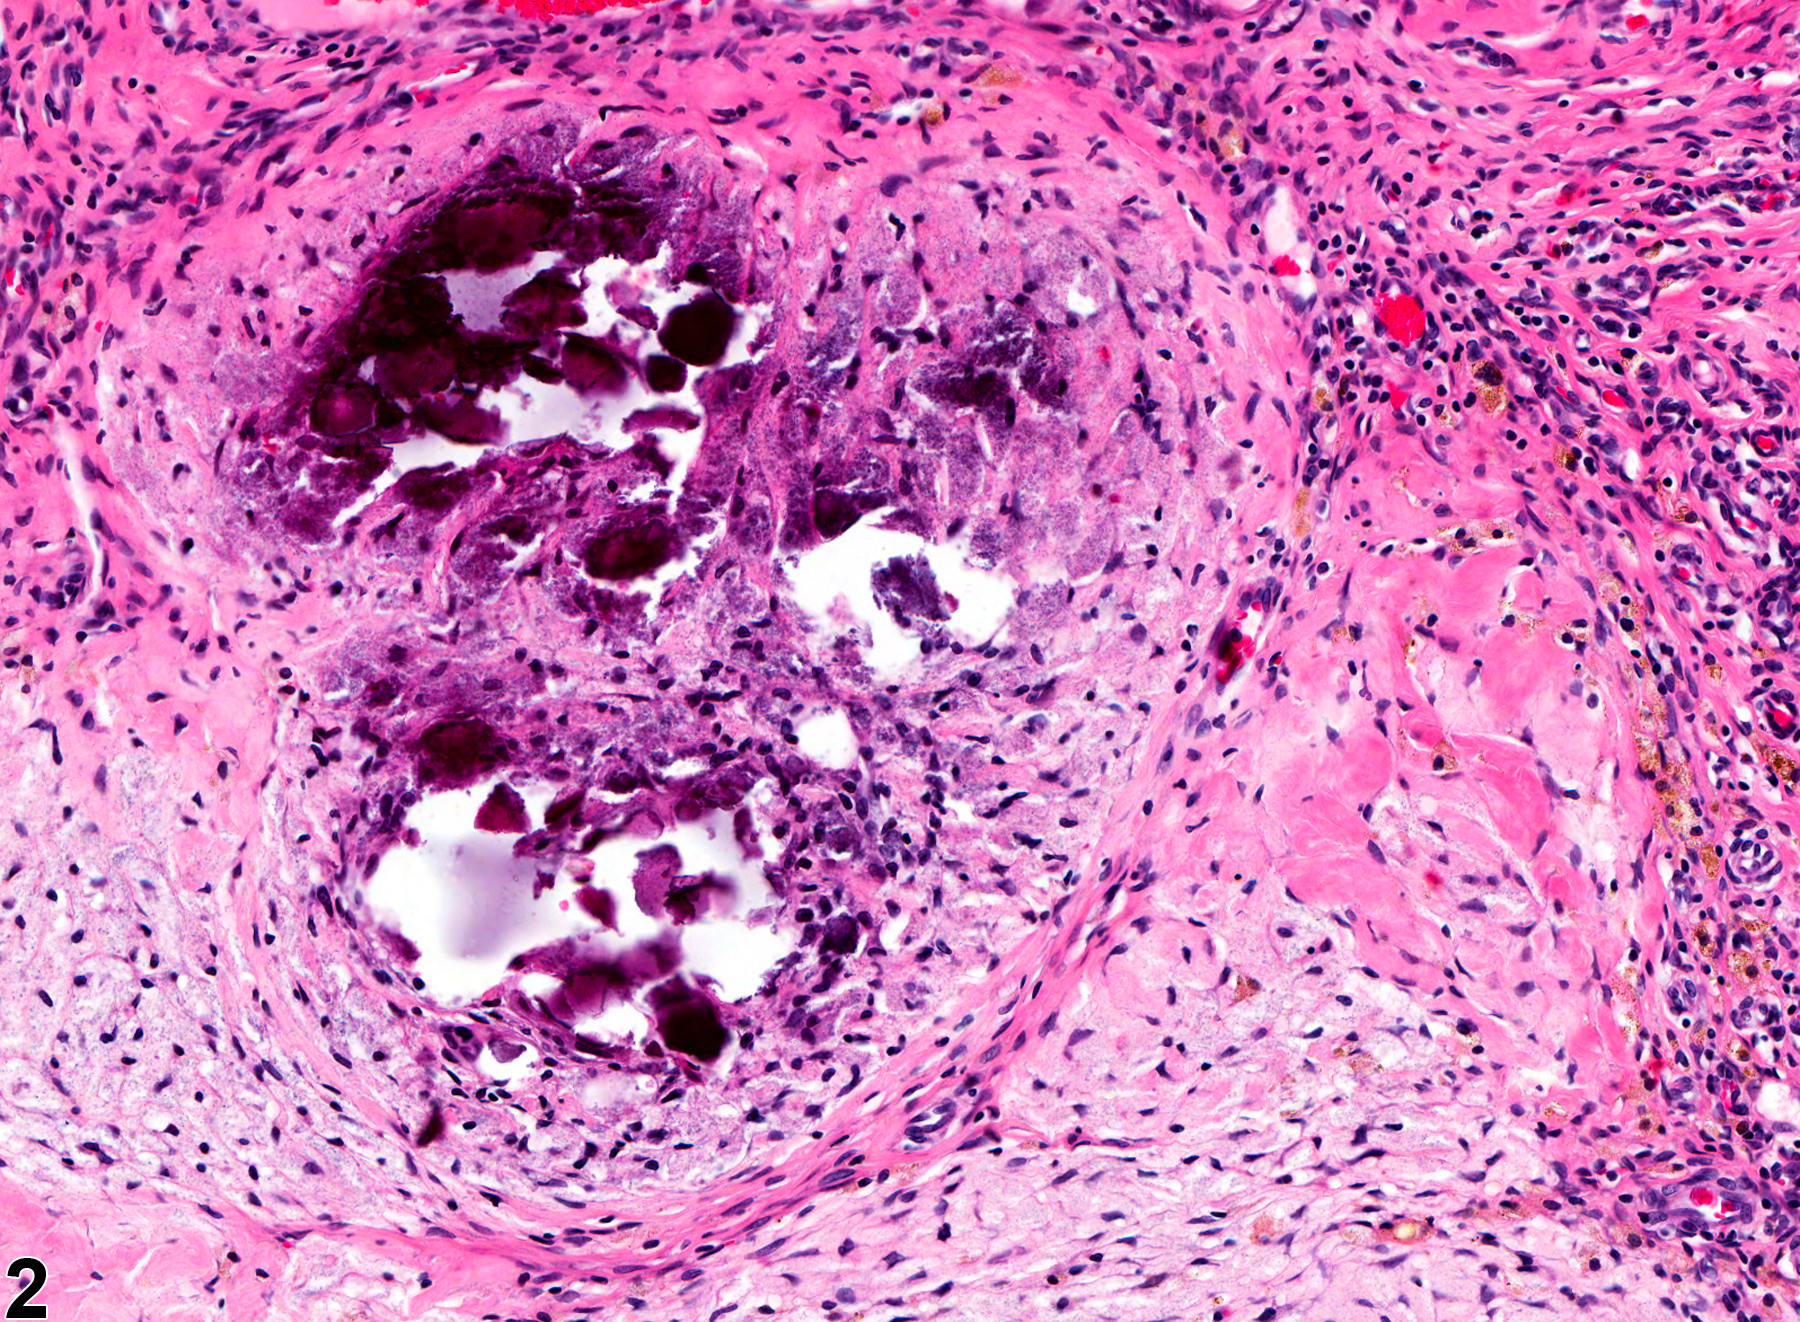 Image of necrosis in the uterus from a female F344/N rat in a chronic study